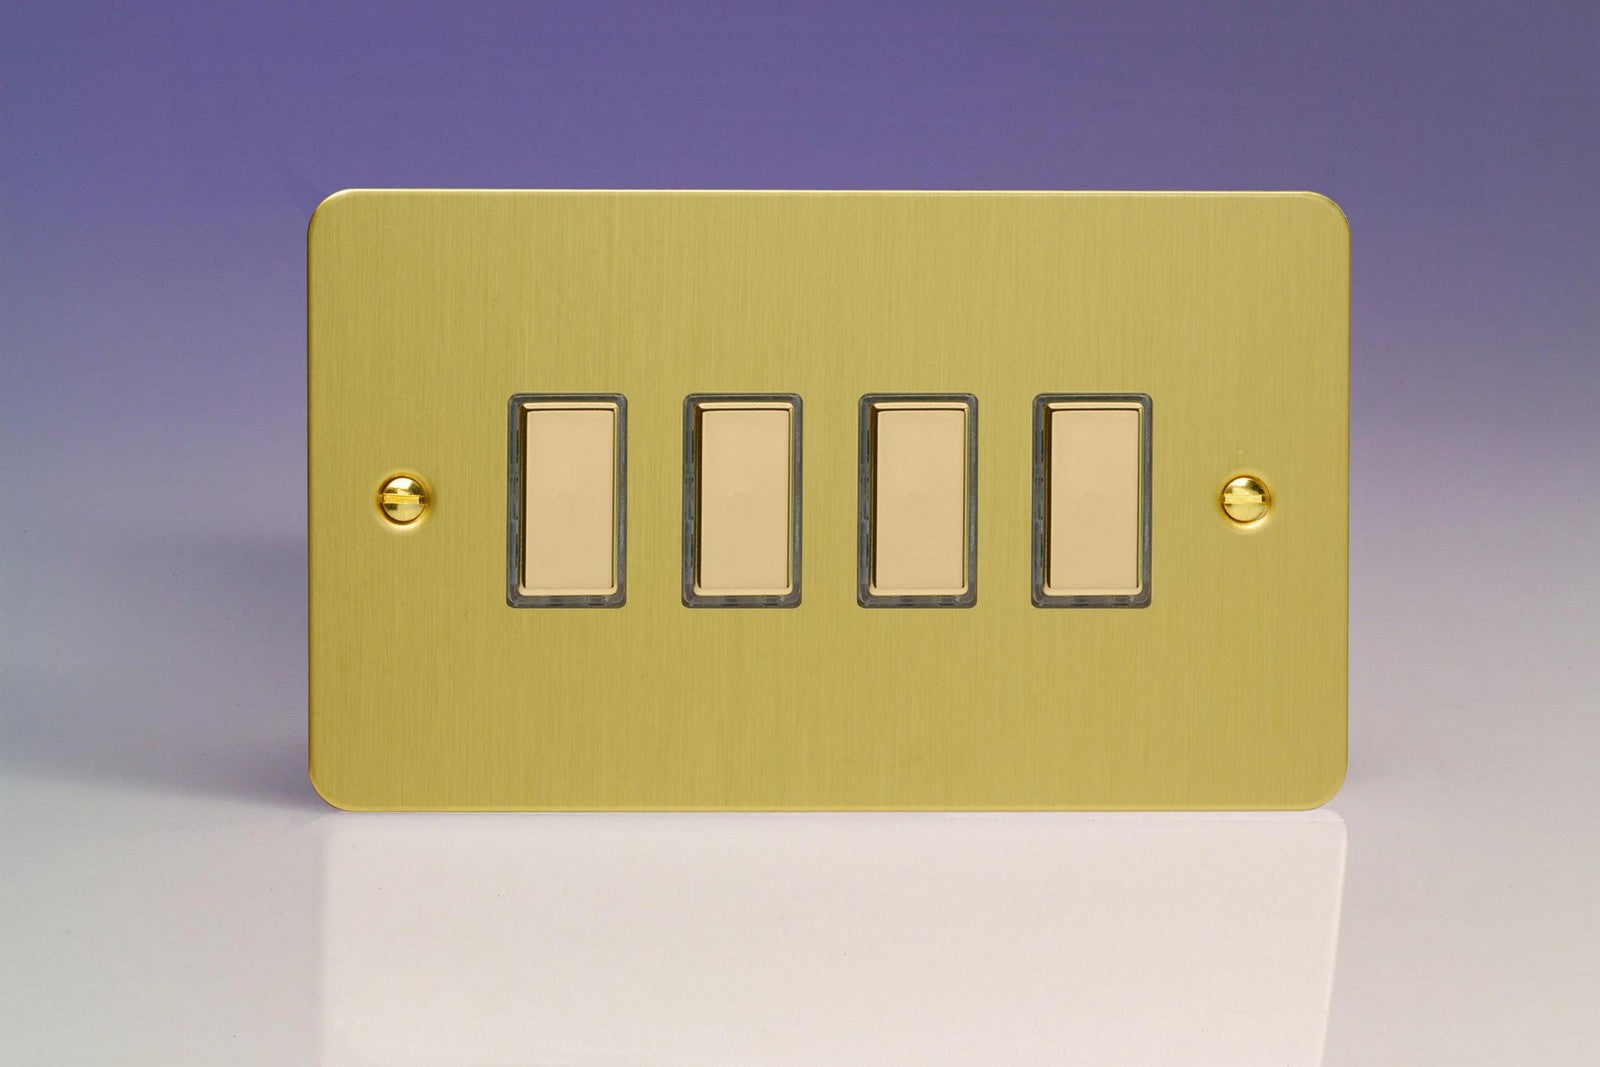 Varilight JFBES004 Ultraflat Brushed Brass 4-Gang Tactile Touch Control Dimming Slave for use with Multi-Point Touch or Remote Master on 2-Way Circuits (Twin Plate)